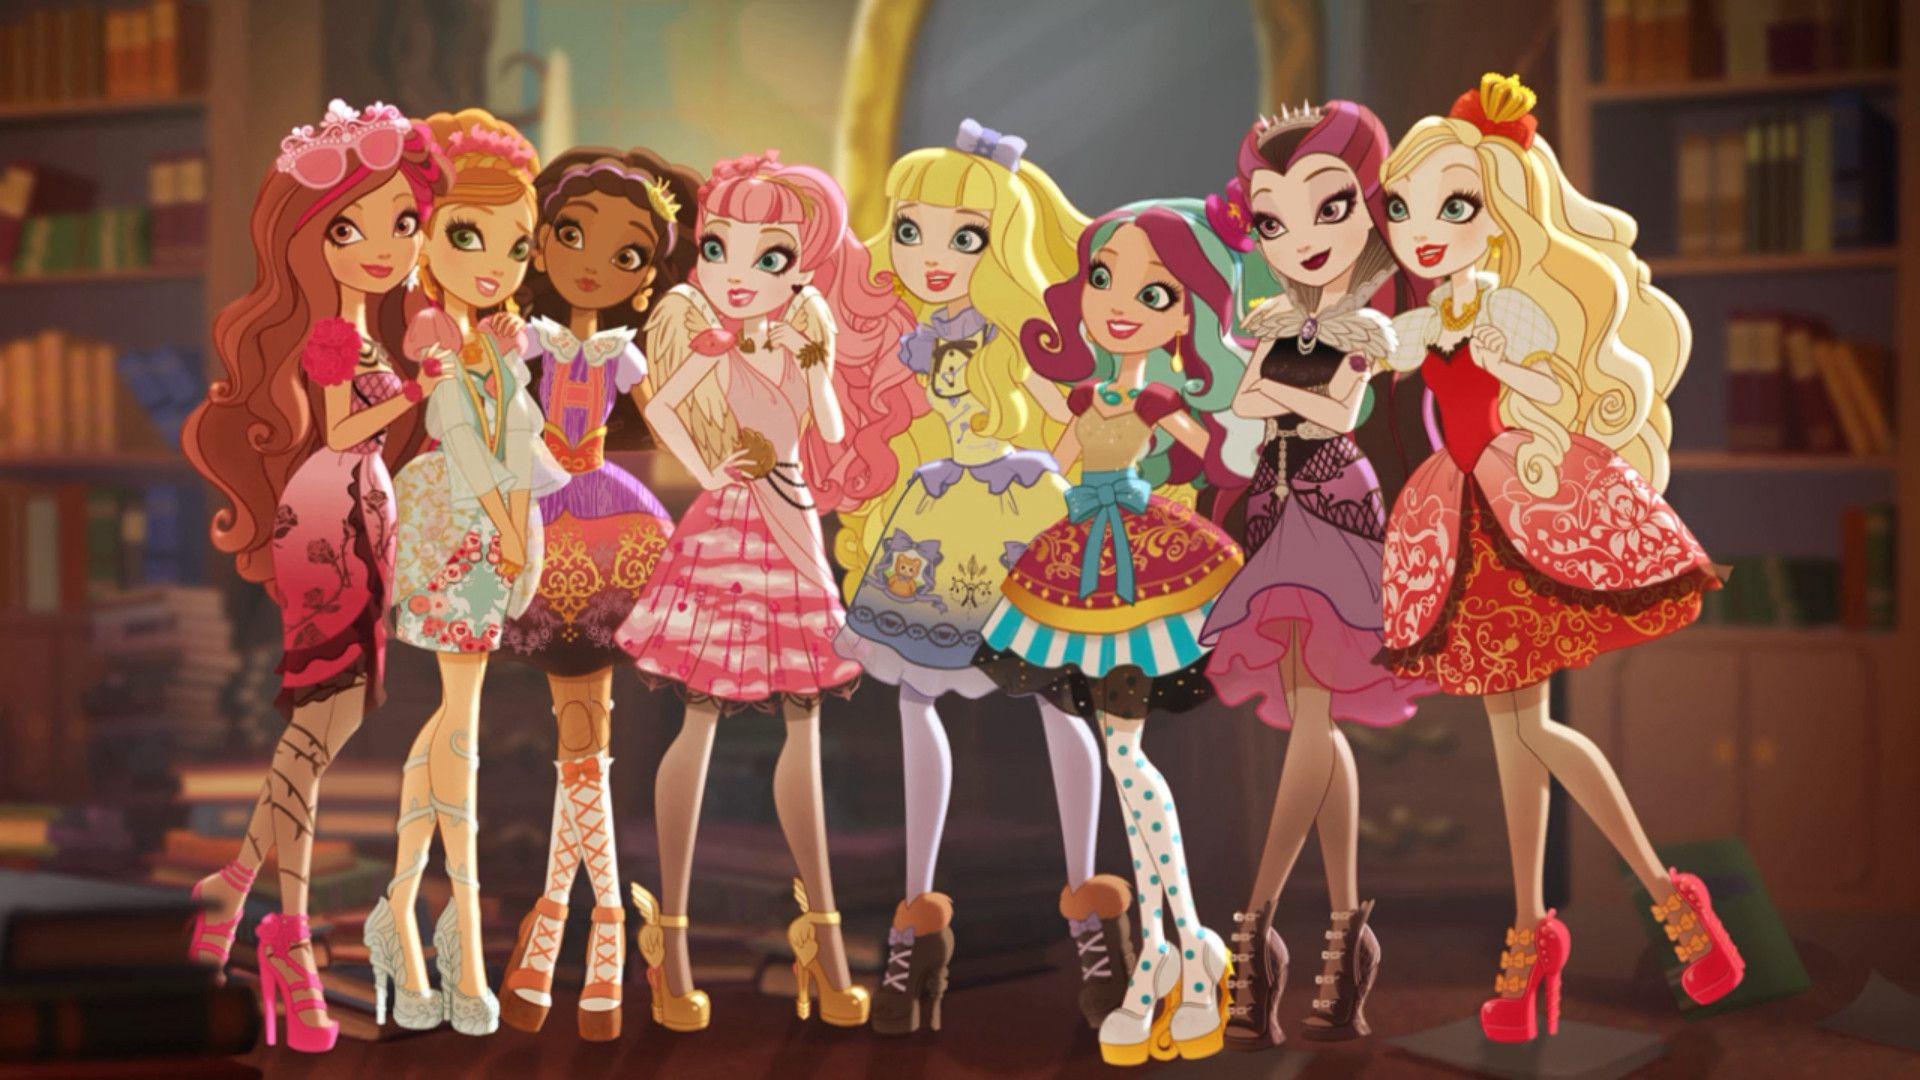 Ever After High. Briar Beauty, Ashlynn Ella, Cedar Wood, C.A Cupid, Blondie Lockes, Madeline Hatter, Raven Queen and Apple W. Ever after high, Ever after, Cartoon